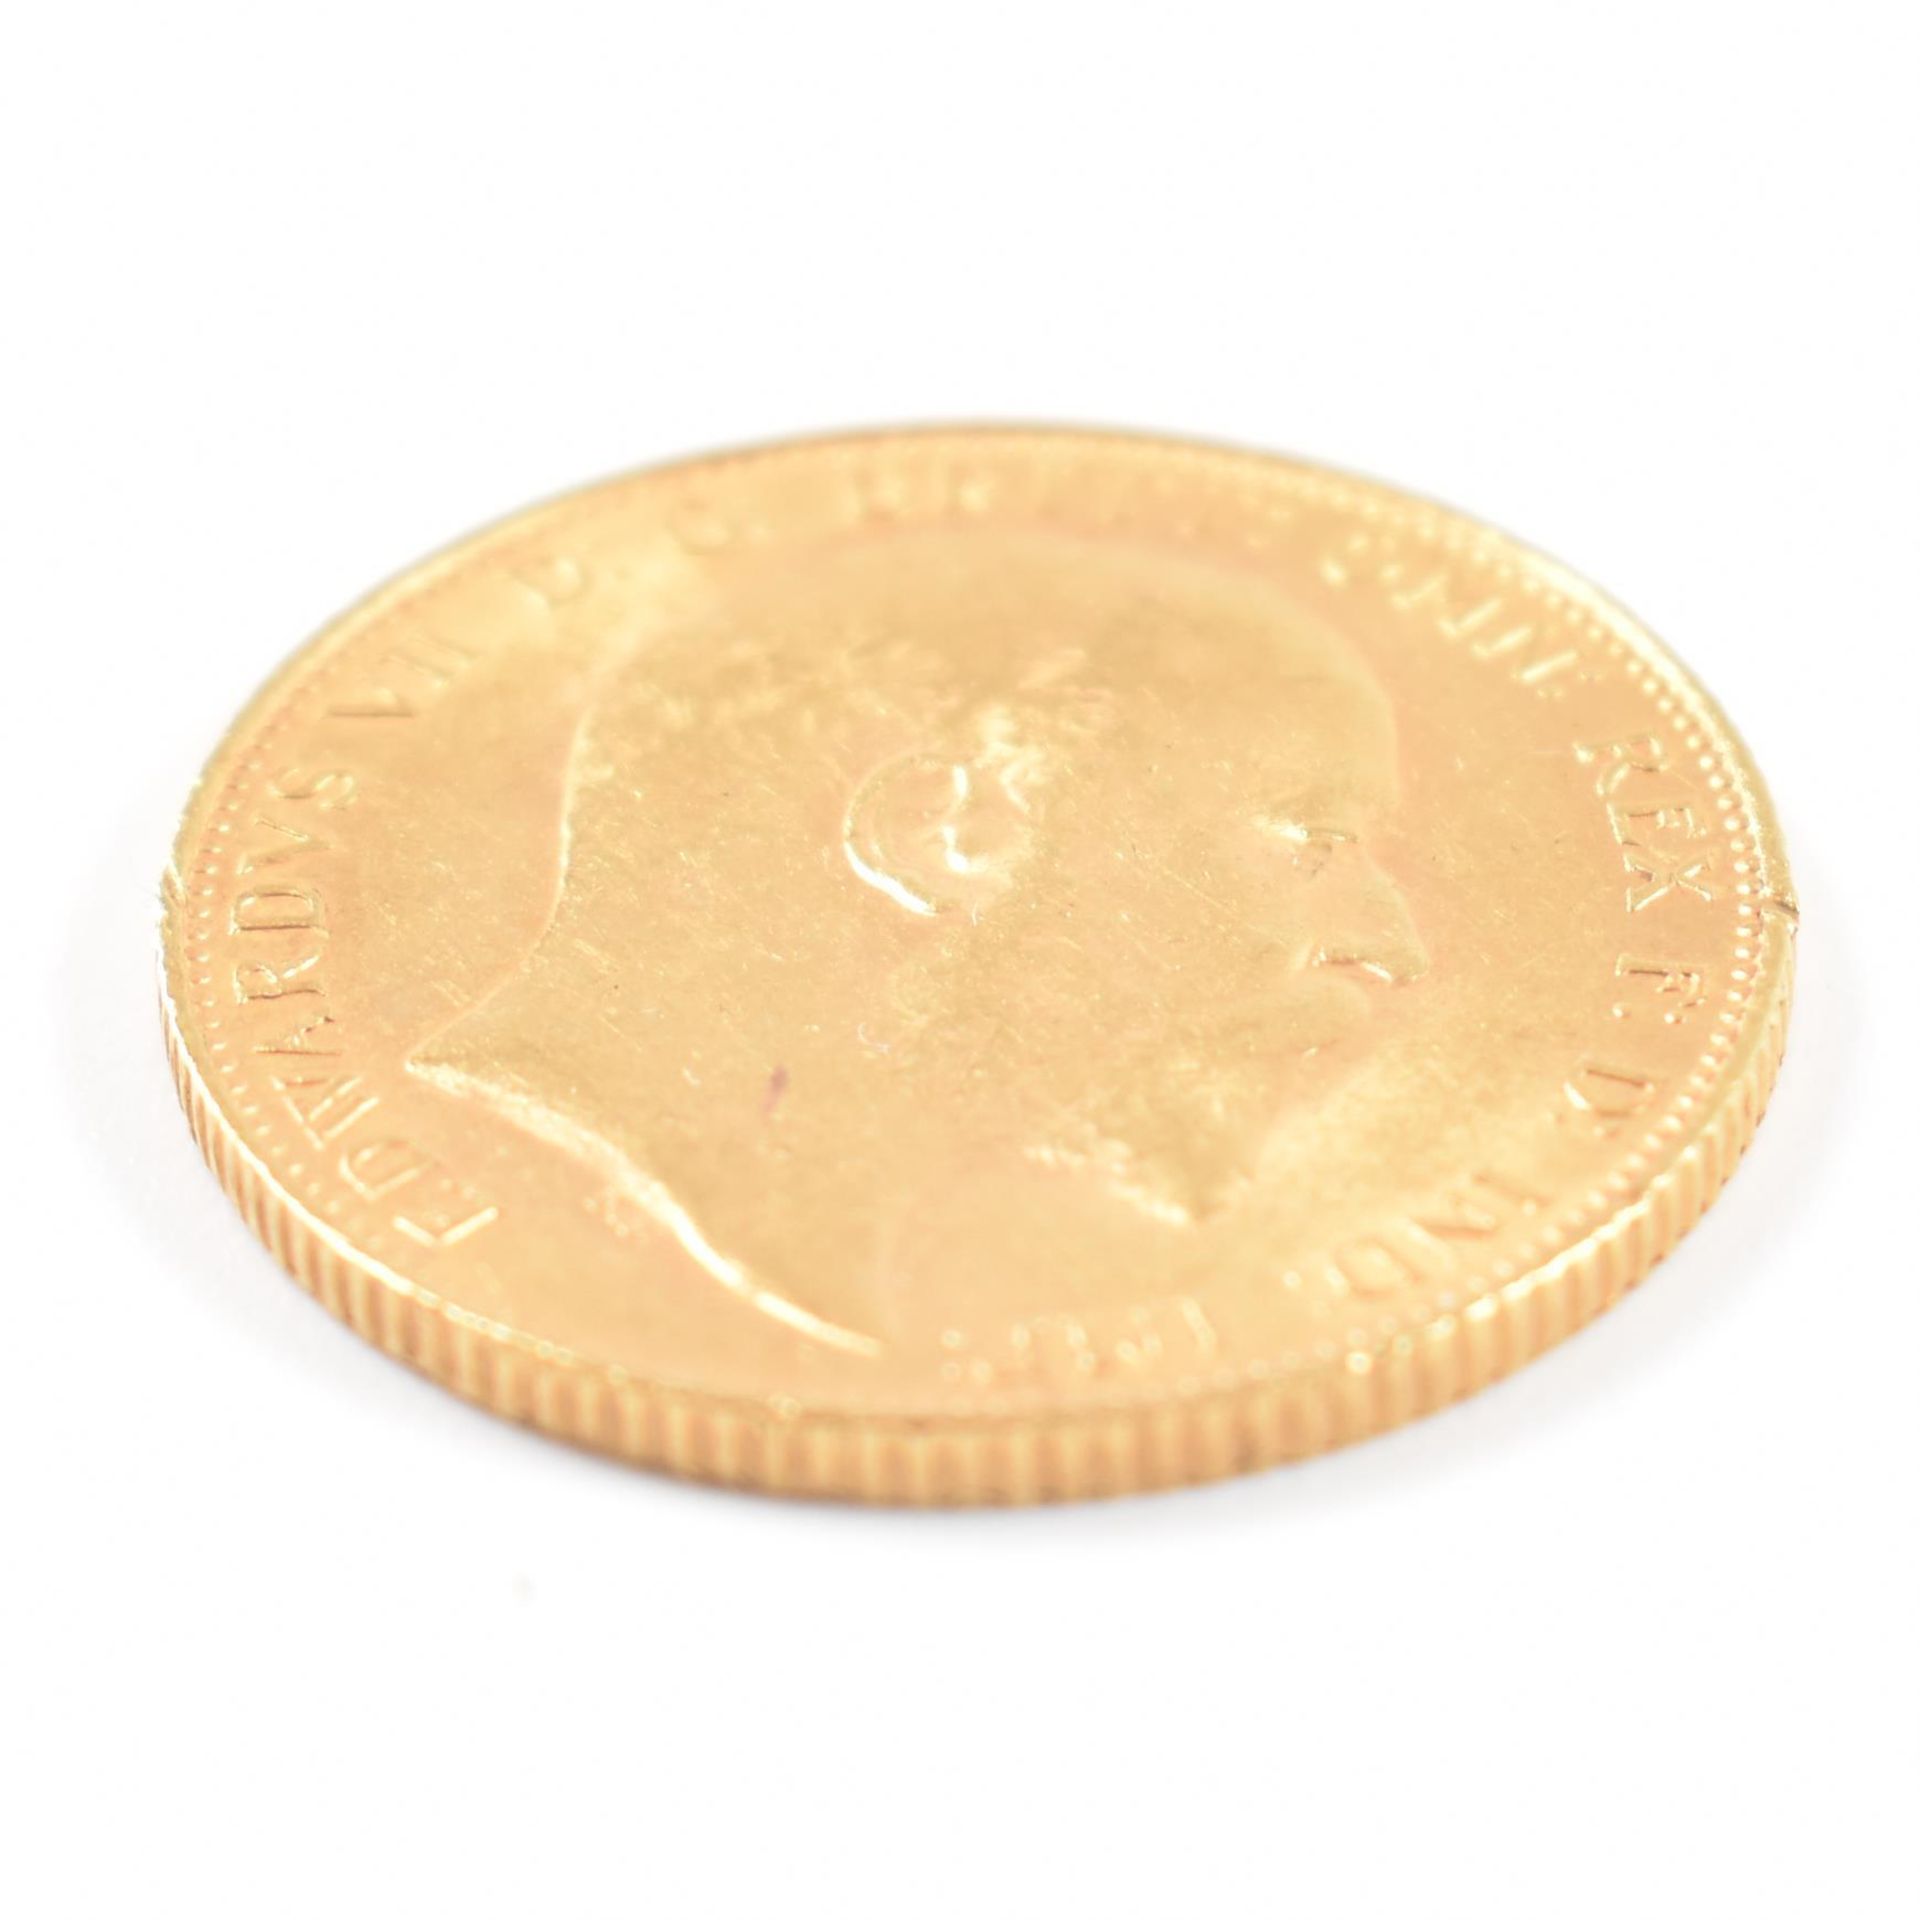 1907 FULL SOVEREIGN COIN - Image 3 of 4